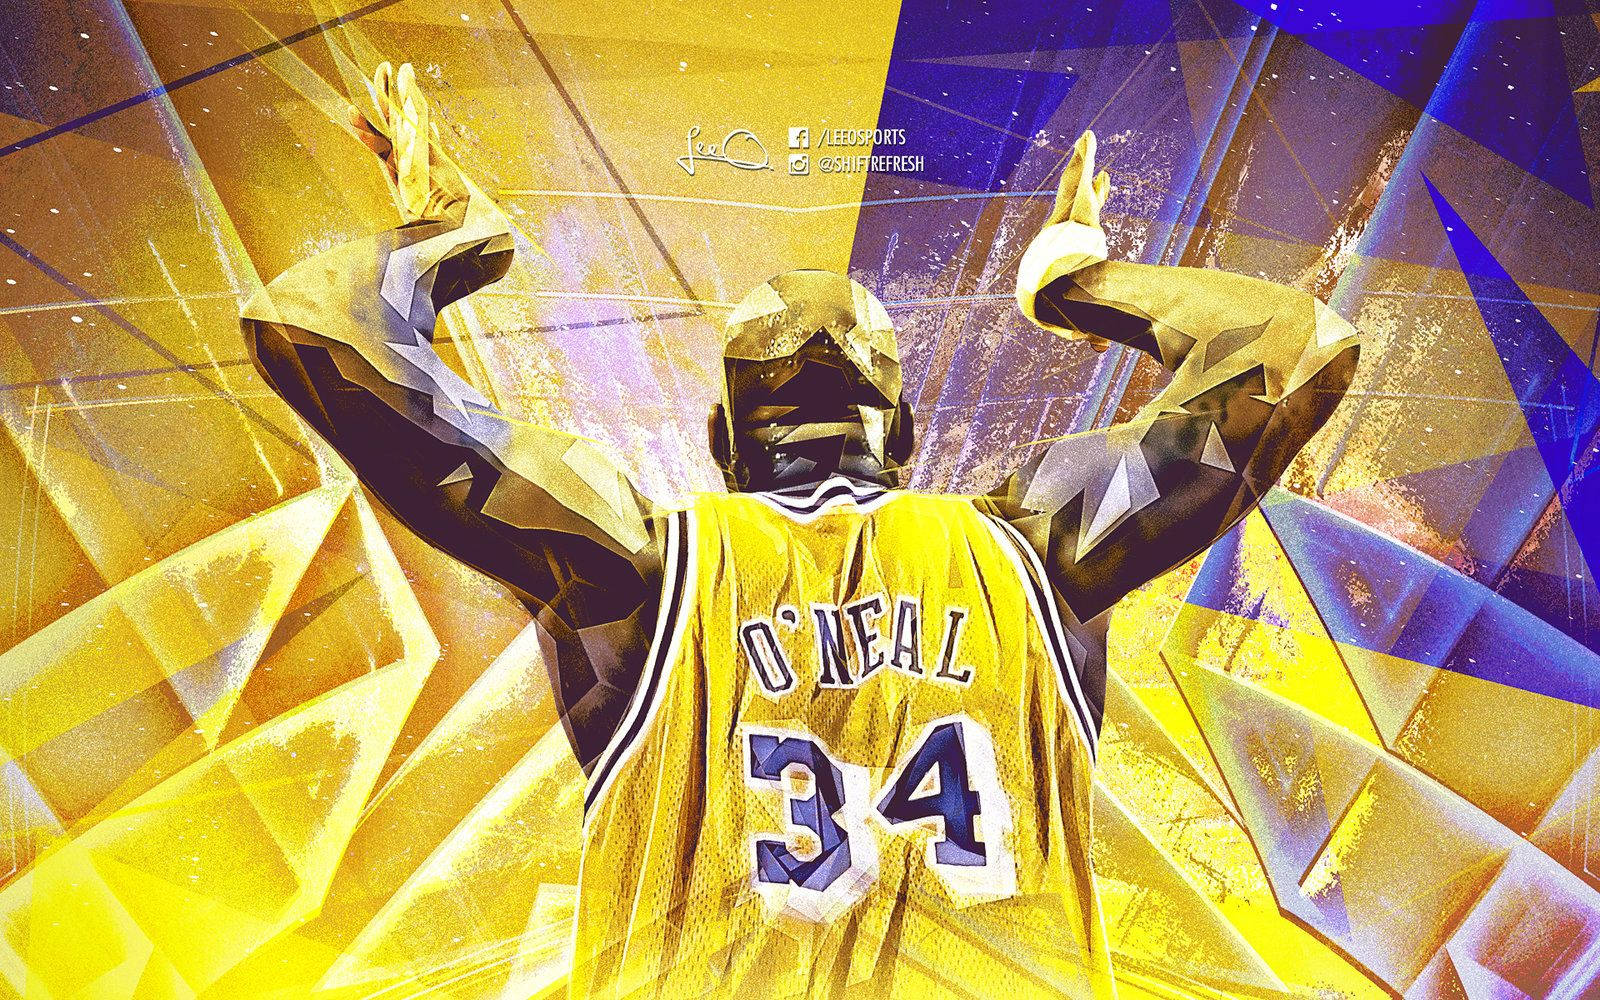 Hall Of Famer Shaquille O’neal Dominating On The Court Wallpaper